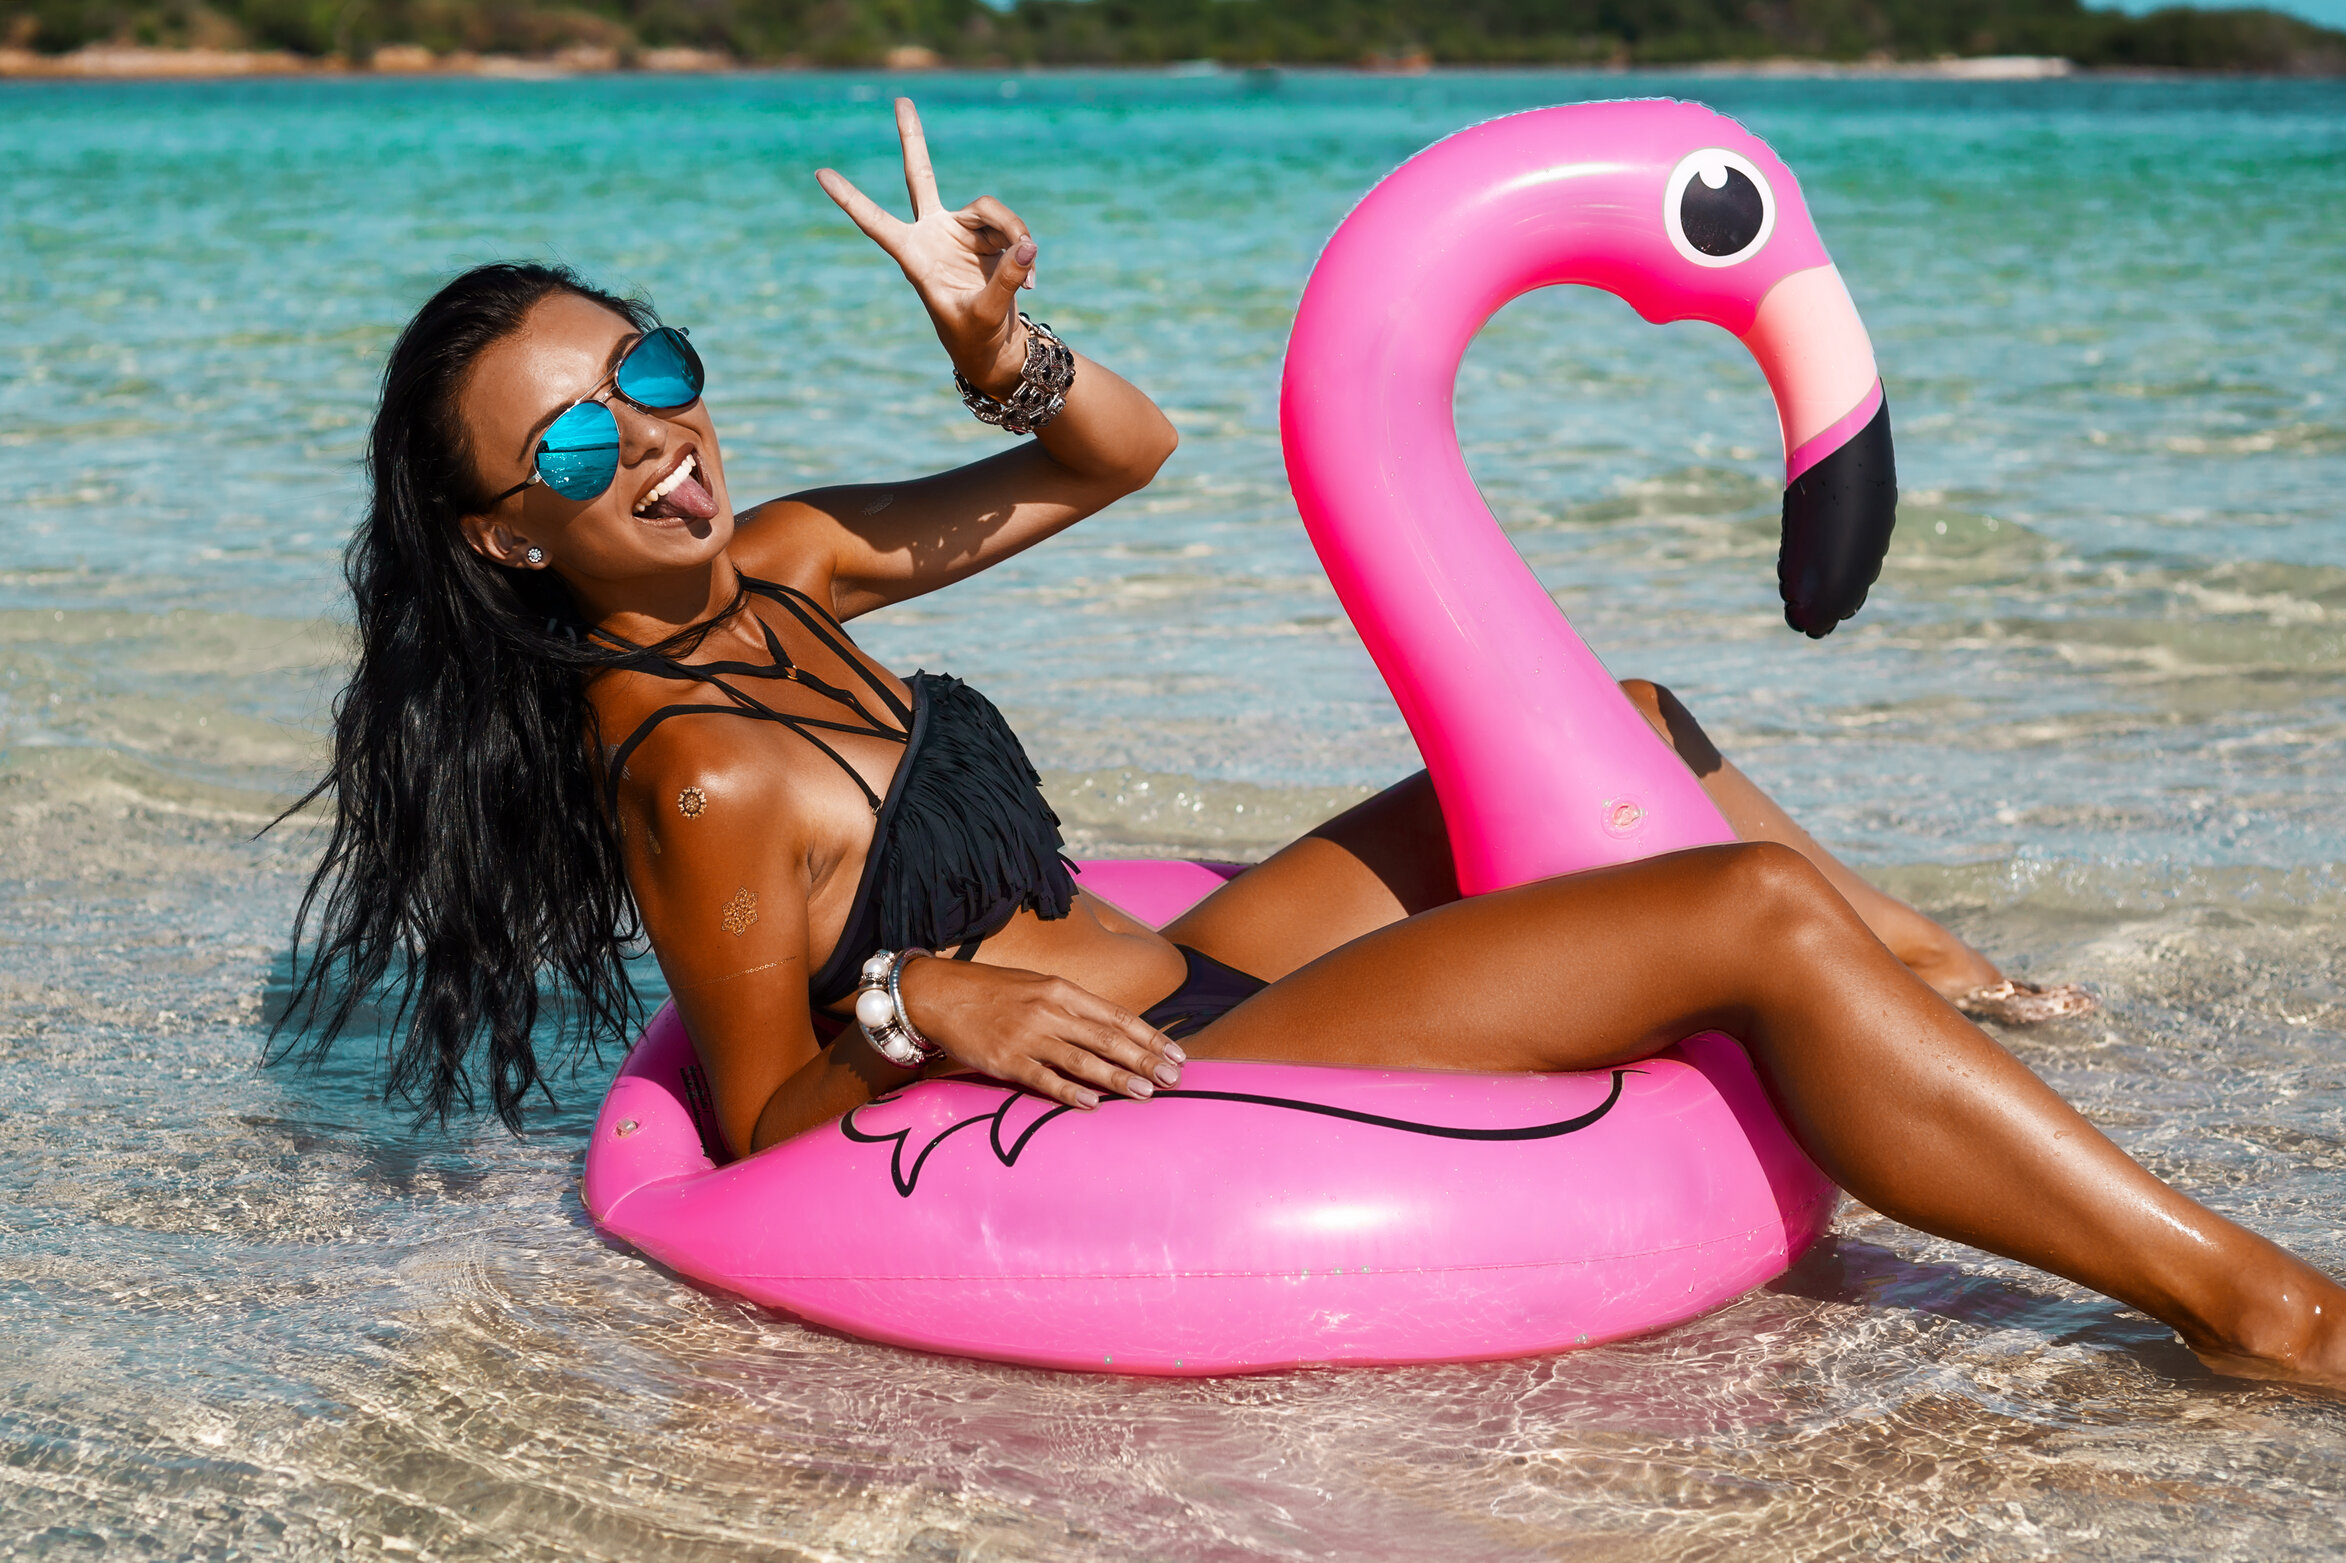 A beautiful sexy amazing young woman on the beach sits on an inflatable pink flamingo and laughs, has a great time, tanned perfect body, long hair, black bikini, fashion accessories, low key photo